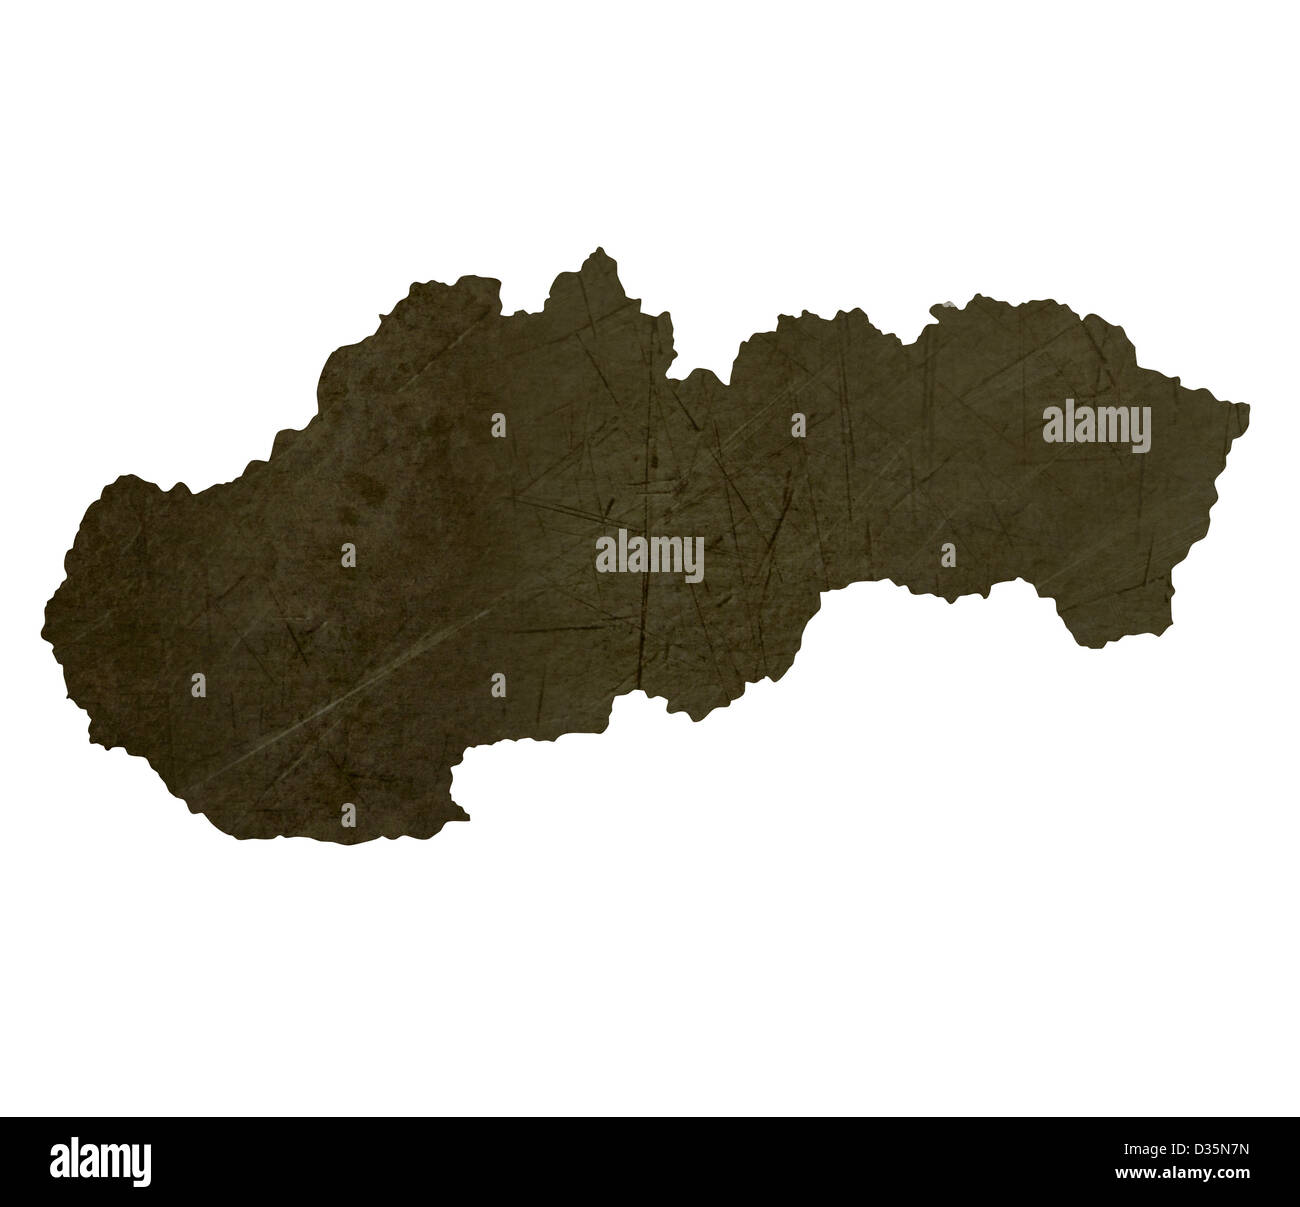 Dark silhouetted and textured map of Slovakia isolated on white background. Stock Photo